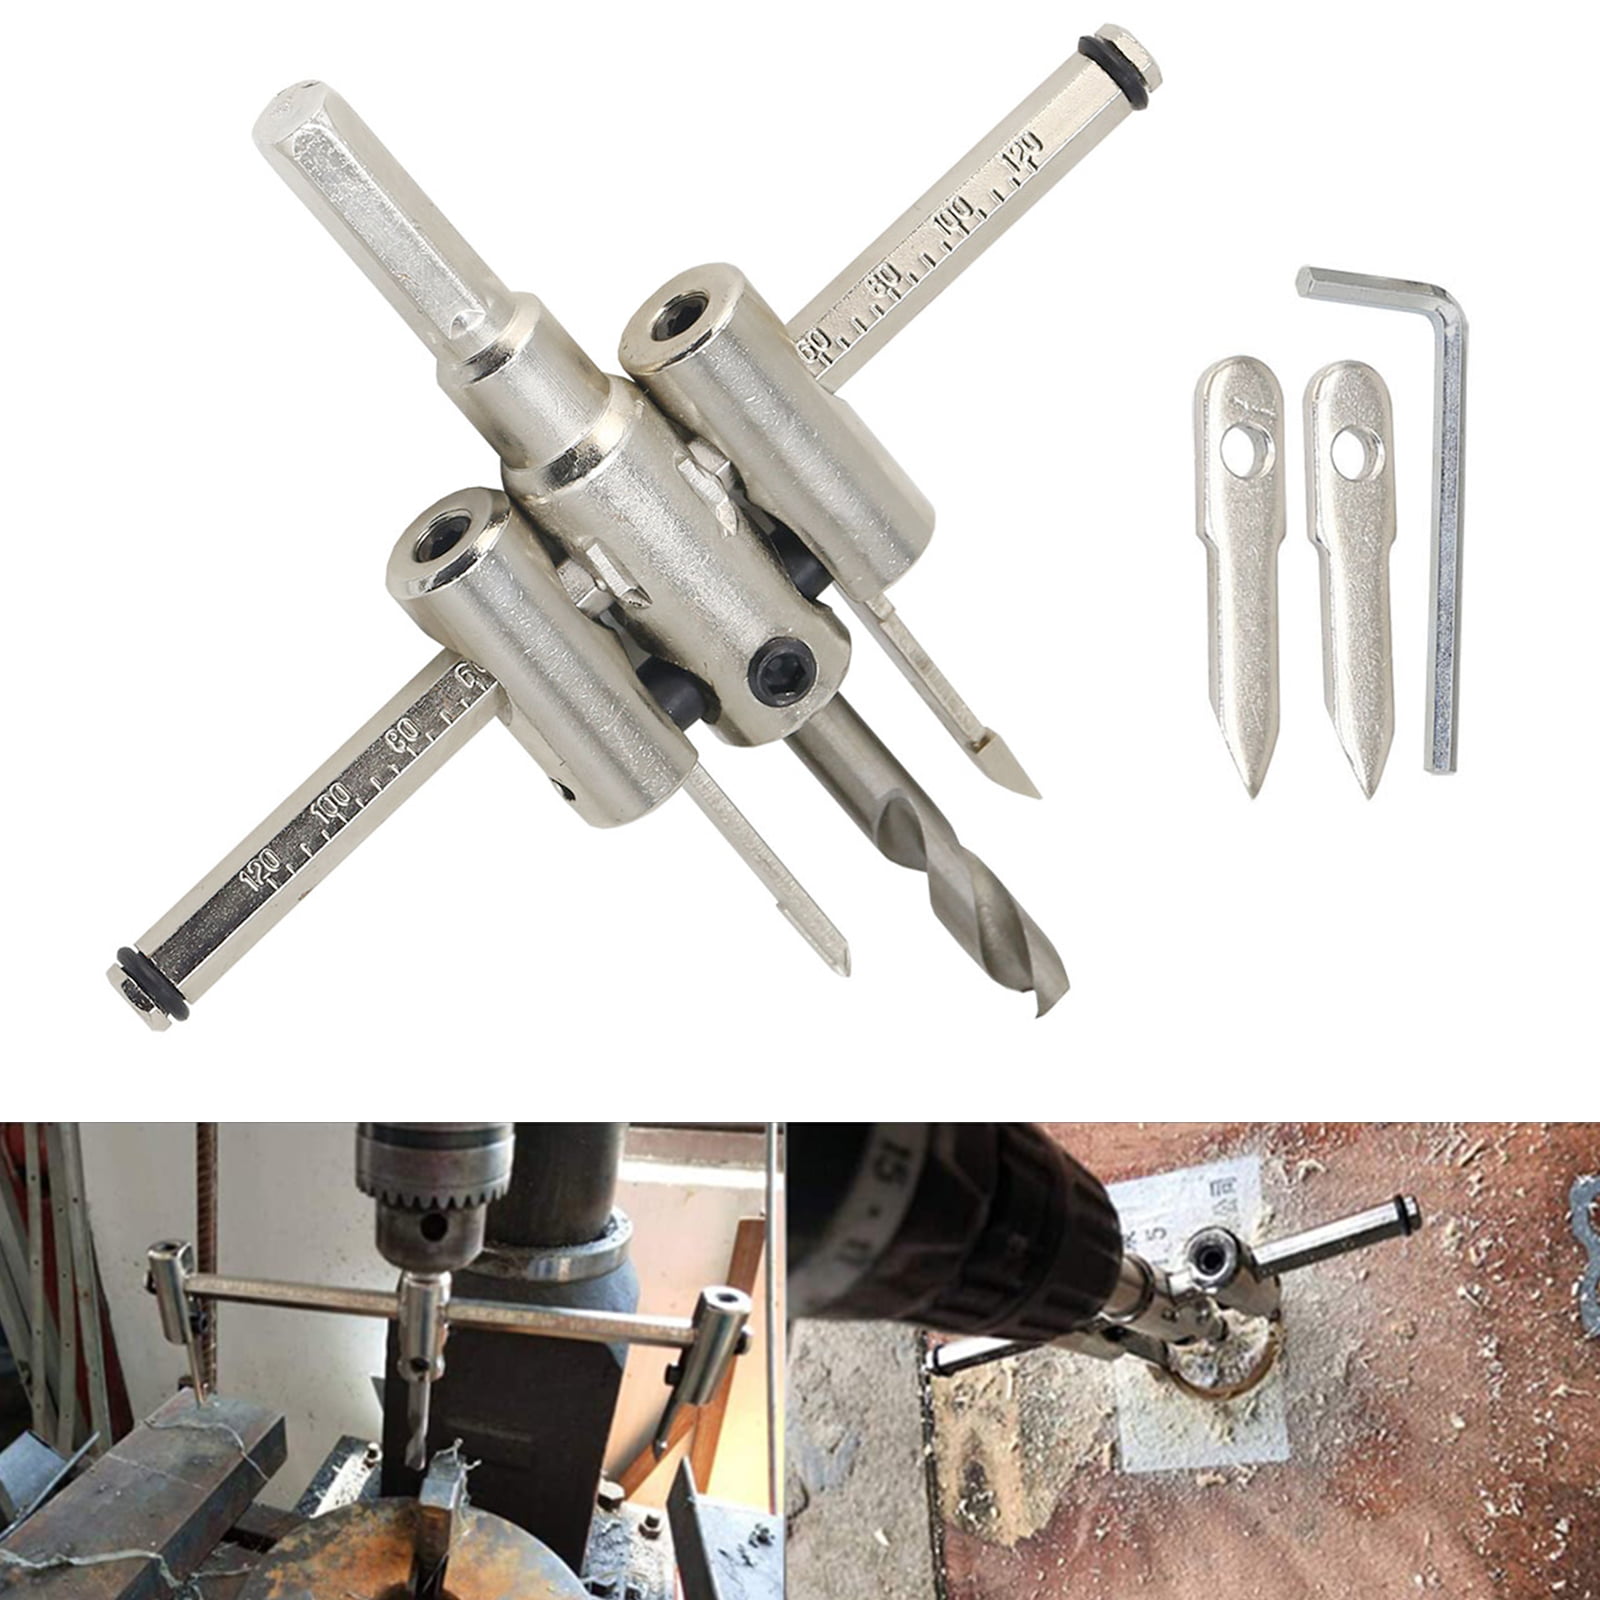 Adjustable Hole Cutter Strong Steel Aircraft Saw Cutter Wood Drywall Drill Bit~ 